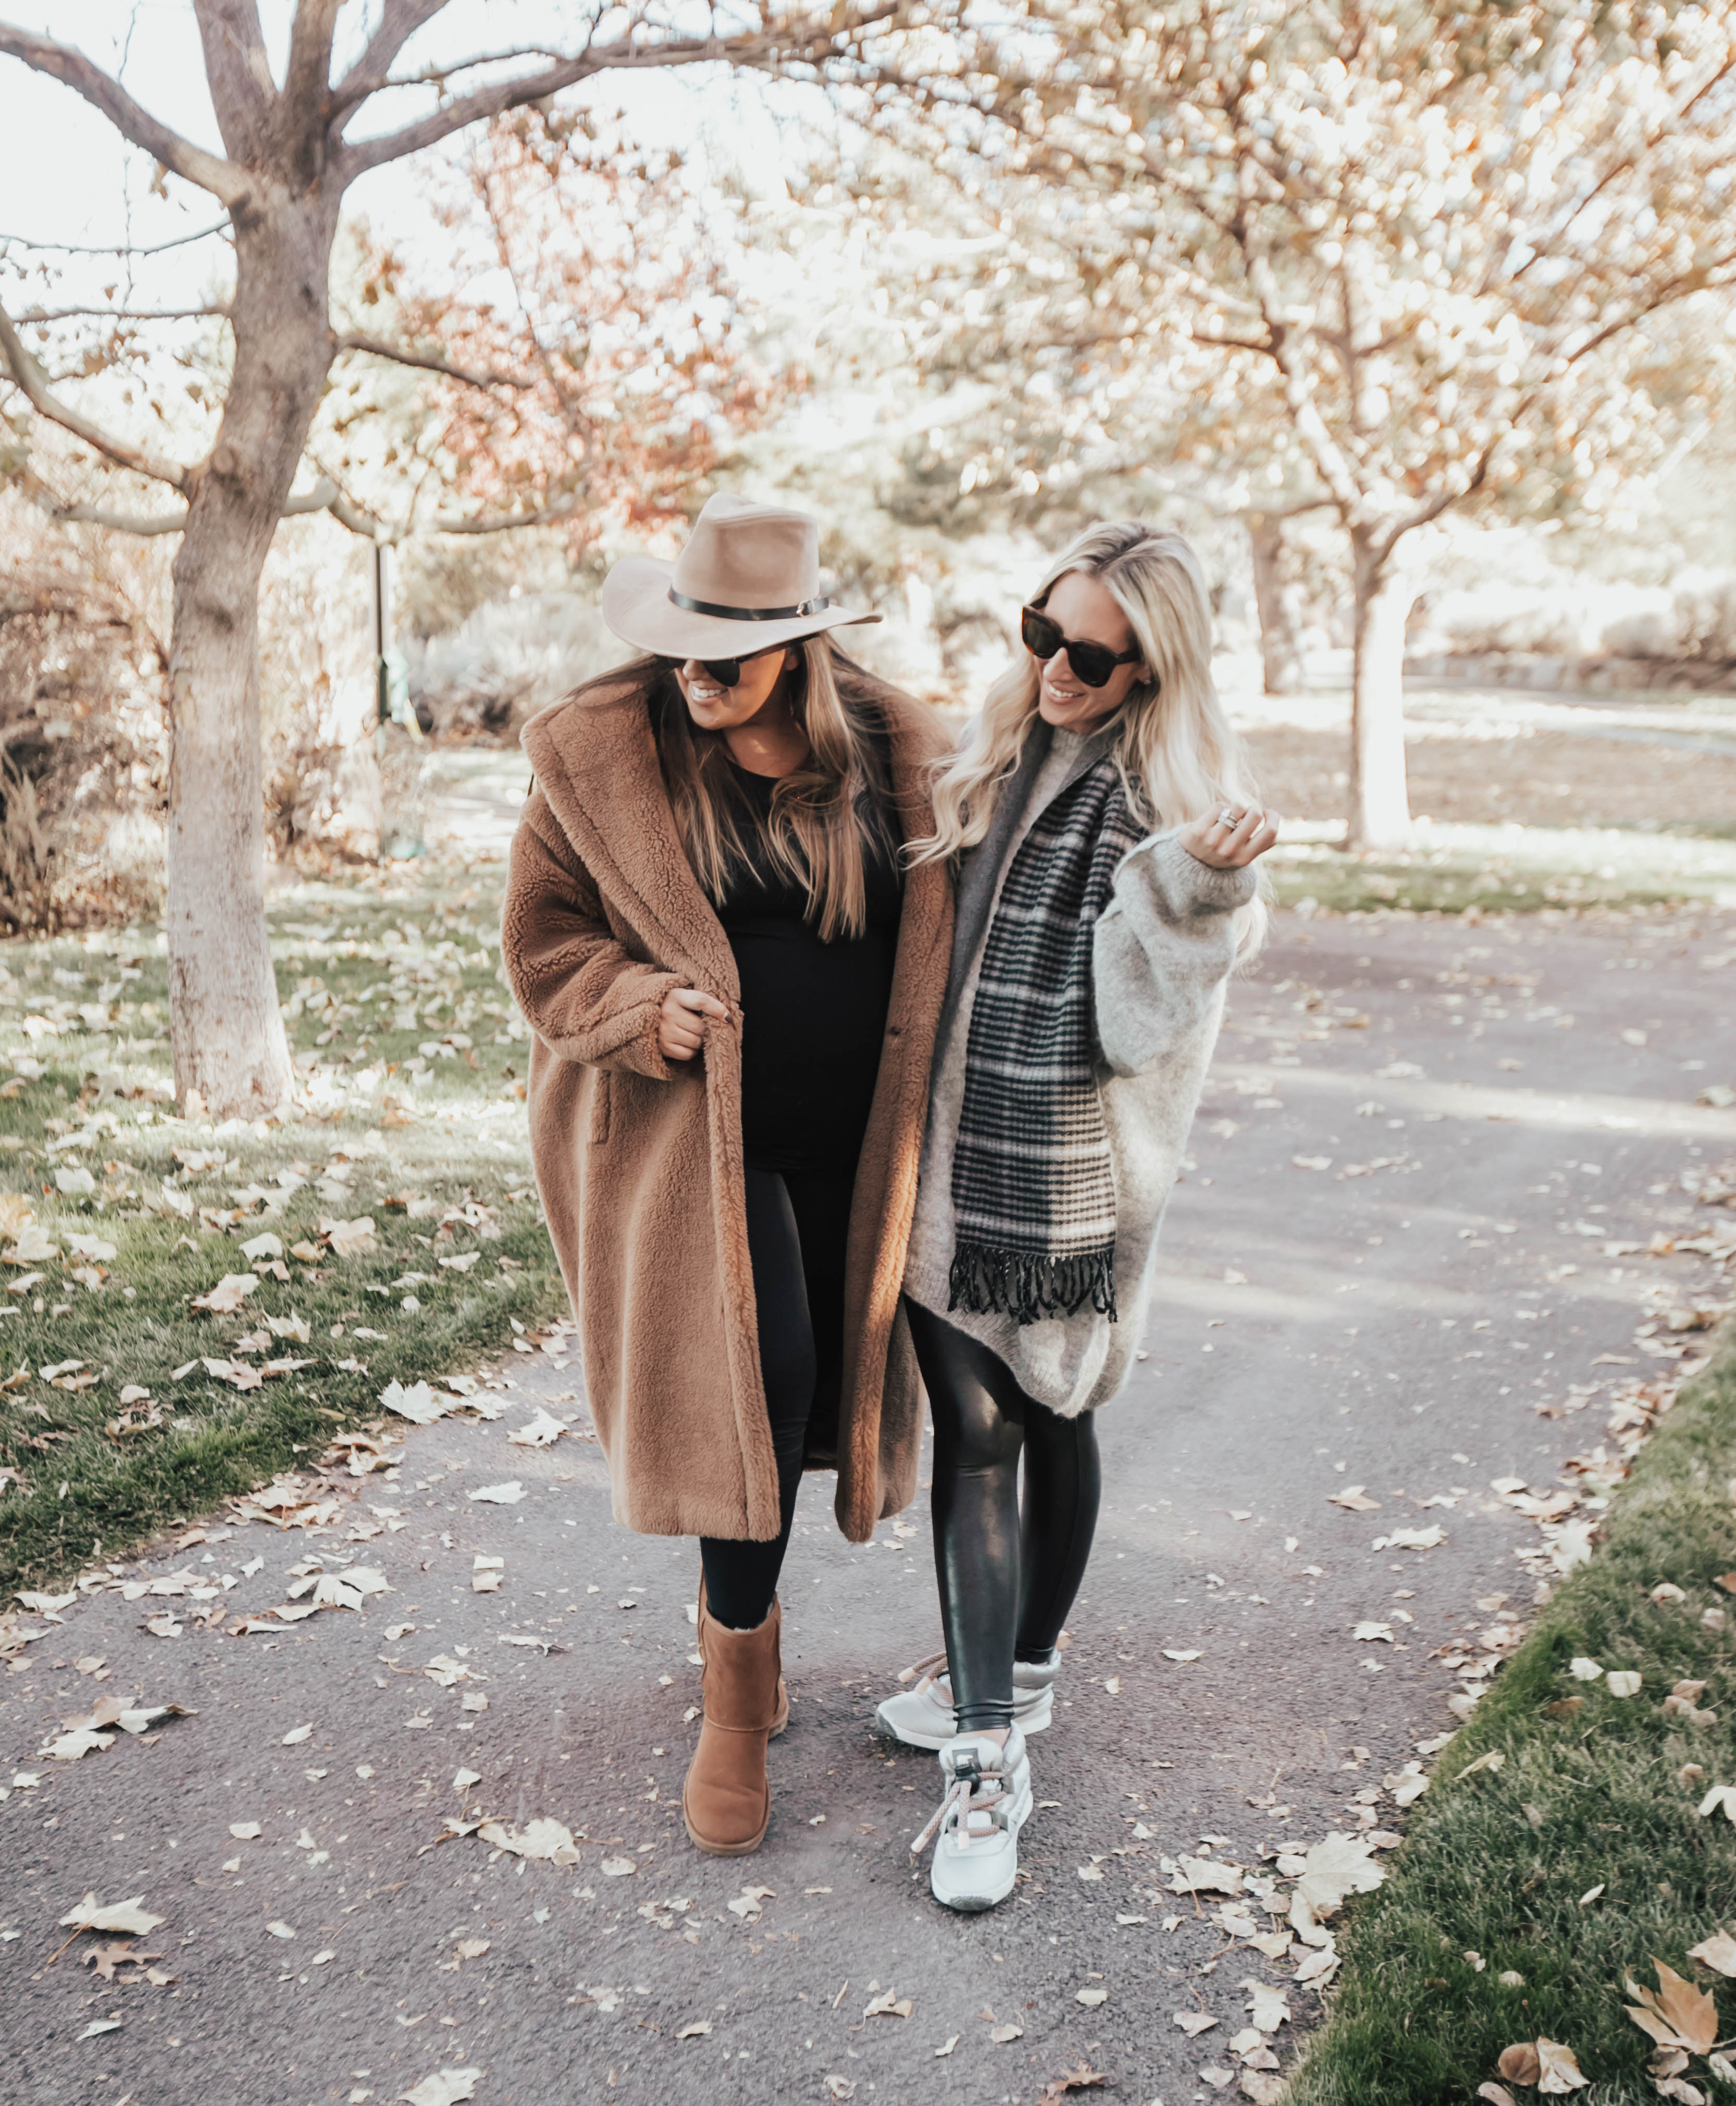 Fashion bloggers Ashley Zeal and Emily Wieczorek from Two Peas in a Prada share their favorite pairs of Winter Shoes from Shoes.com